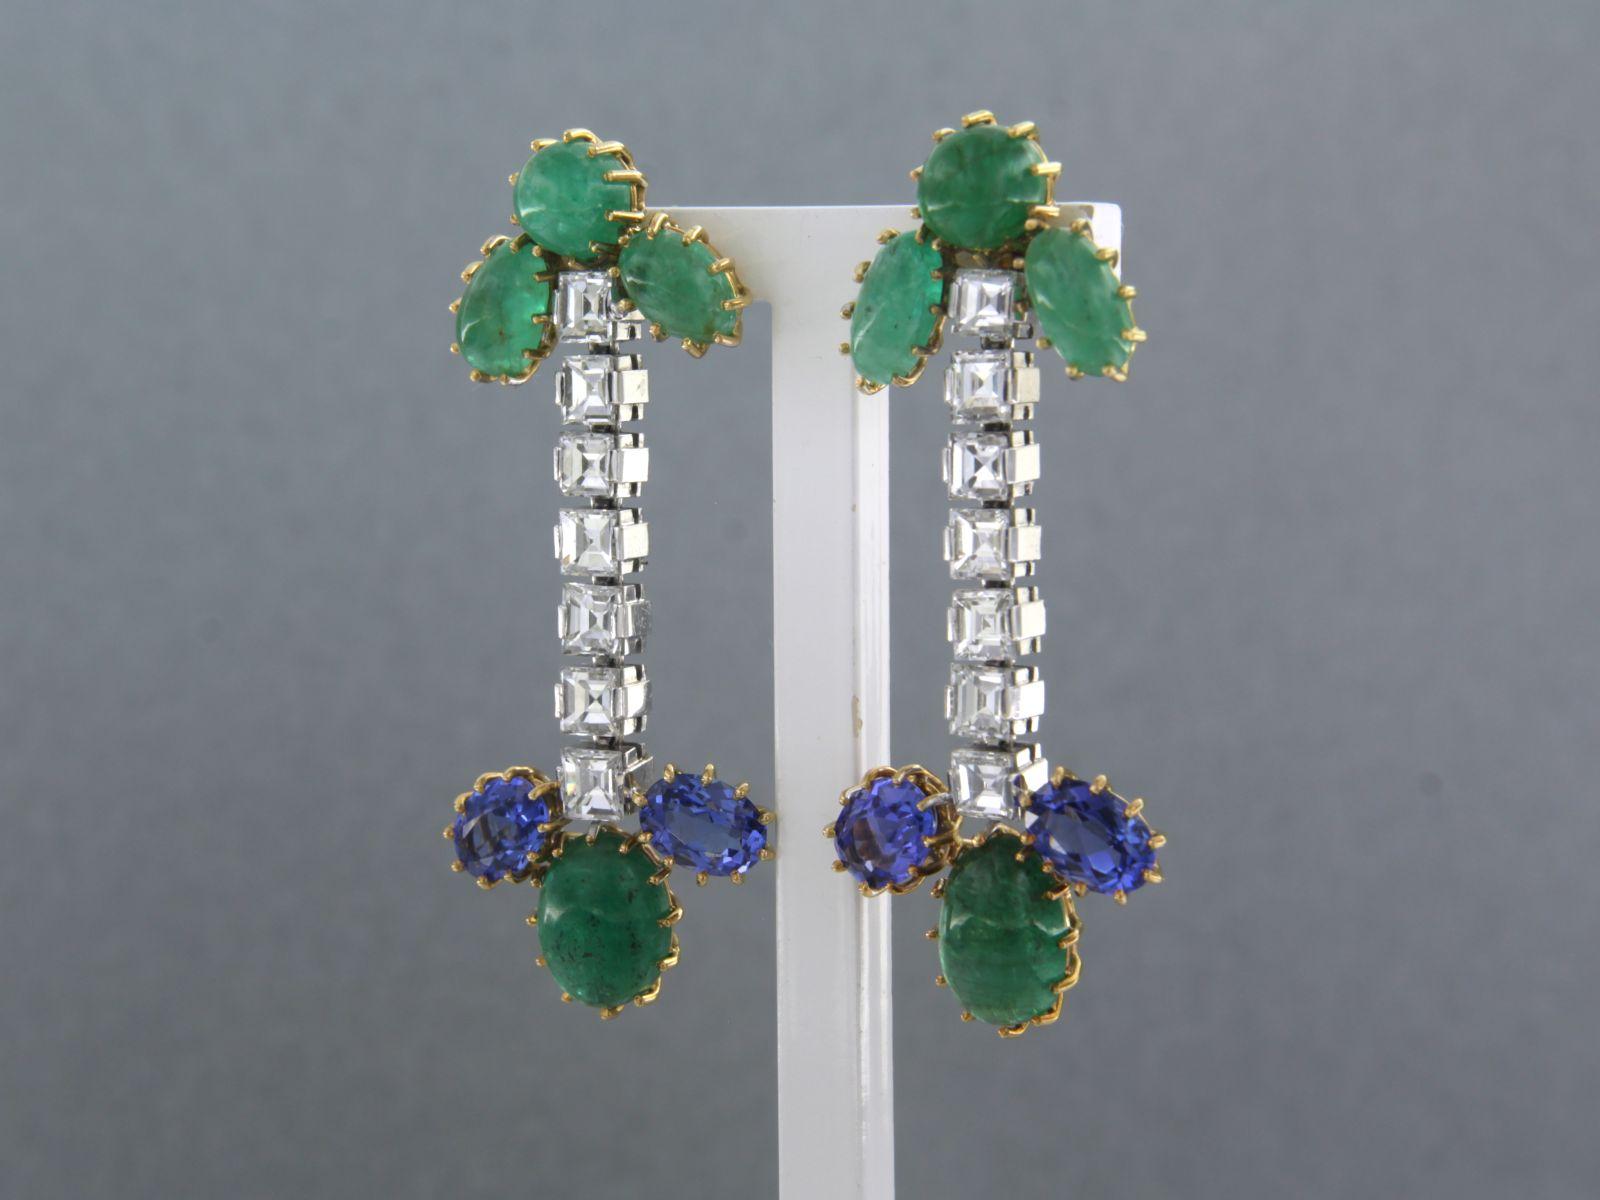 Earrings set with emerald, tanzanite and diamond, 18k gold In Excellent Condition For Sale In The Hague, ZH